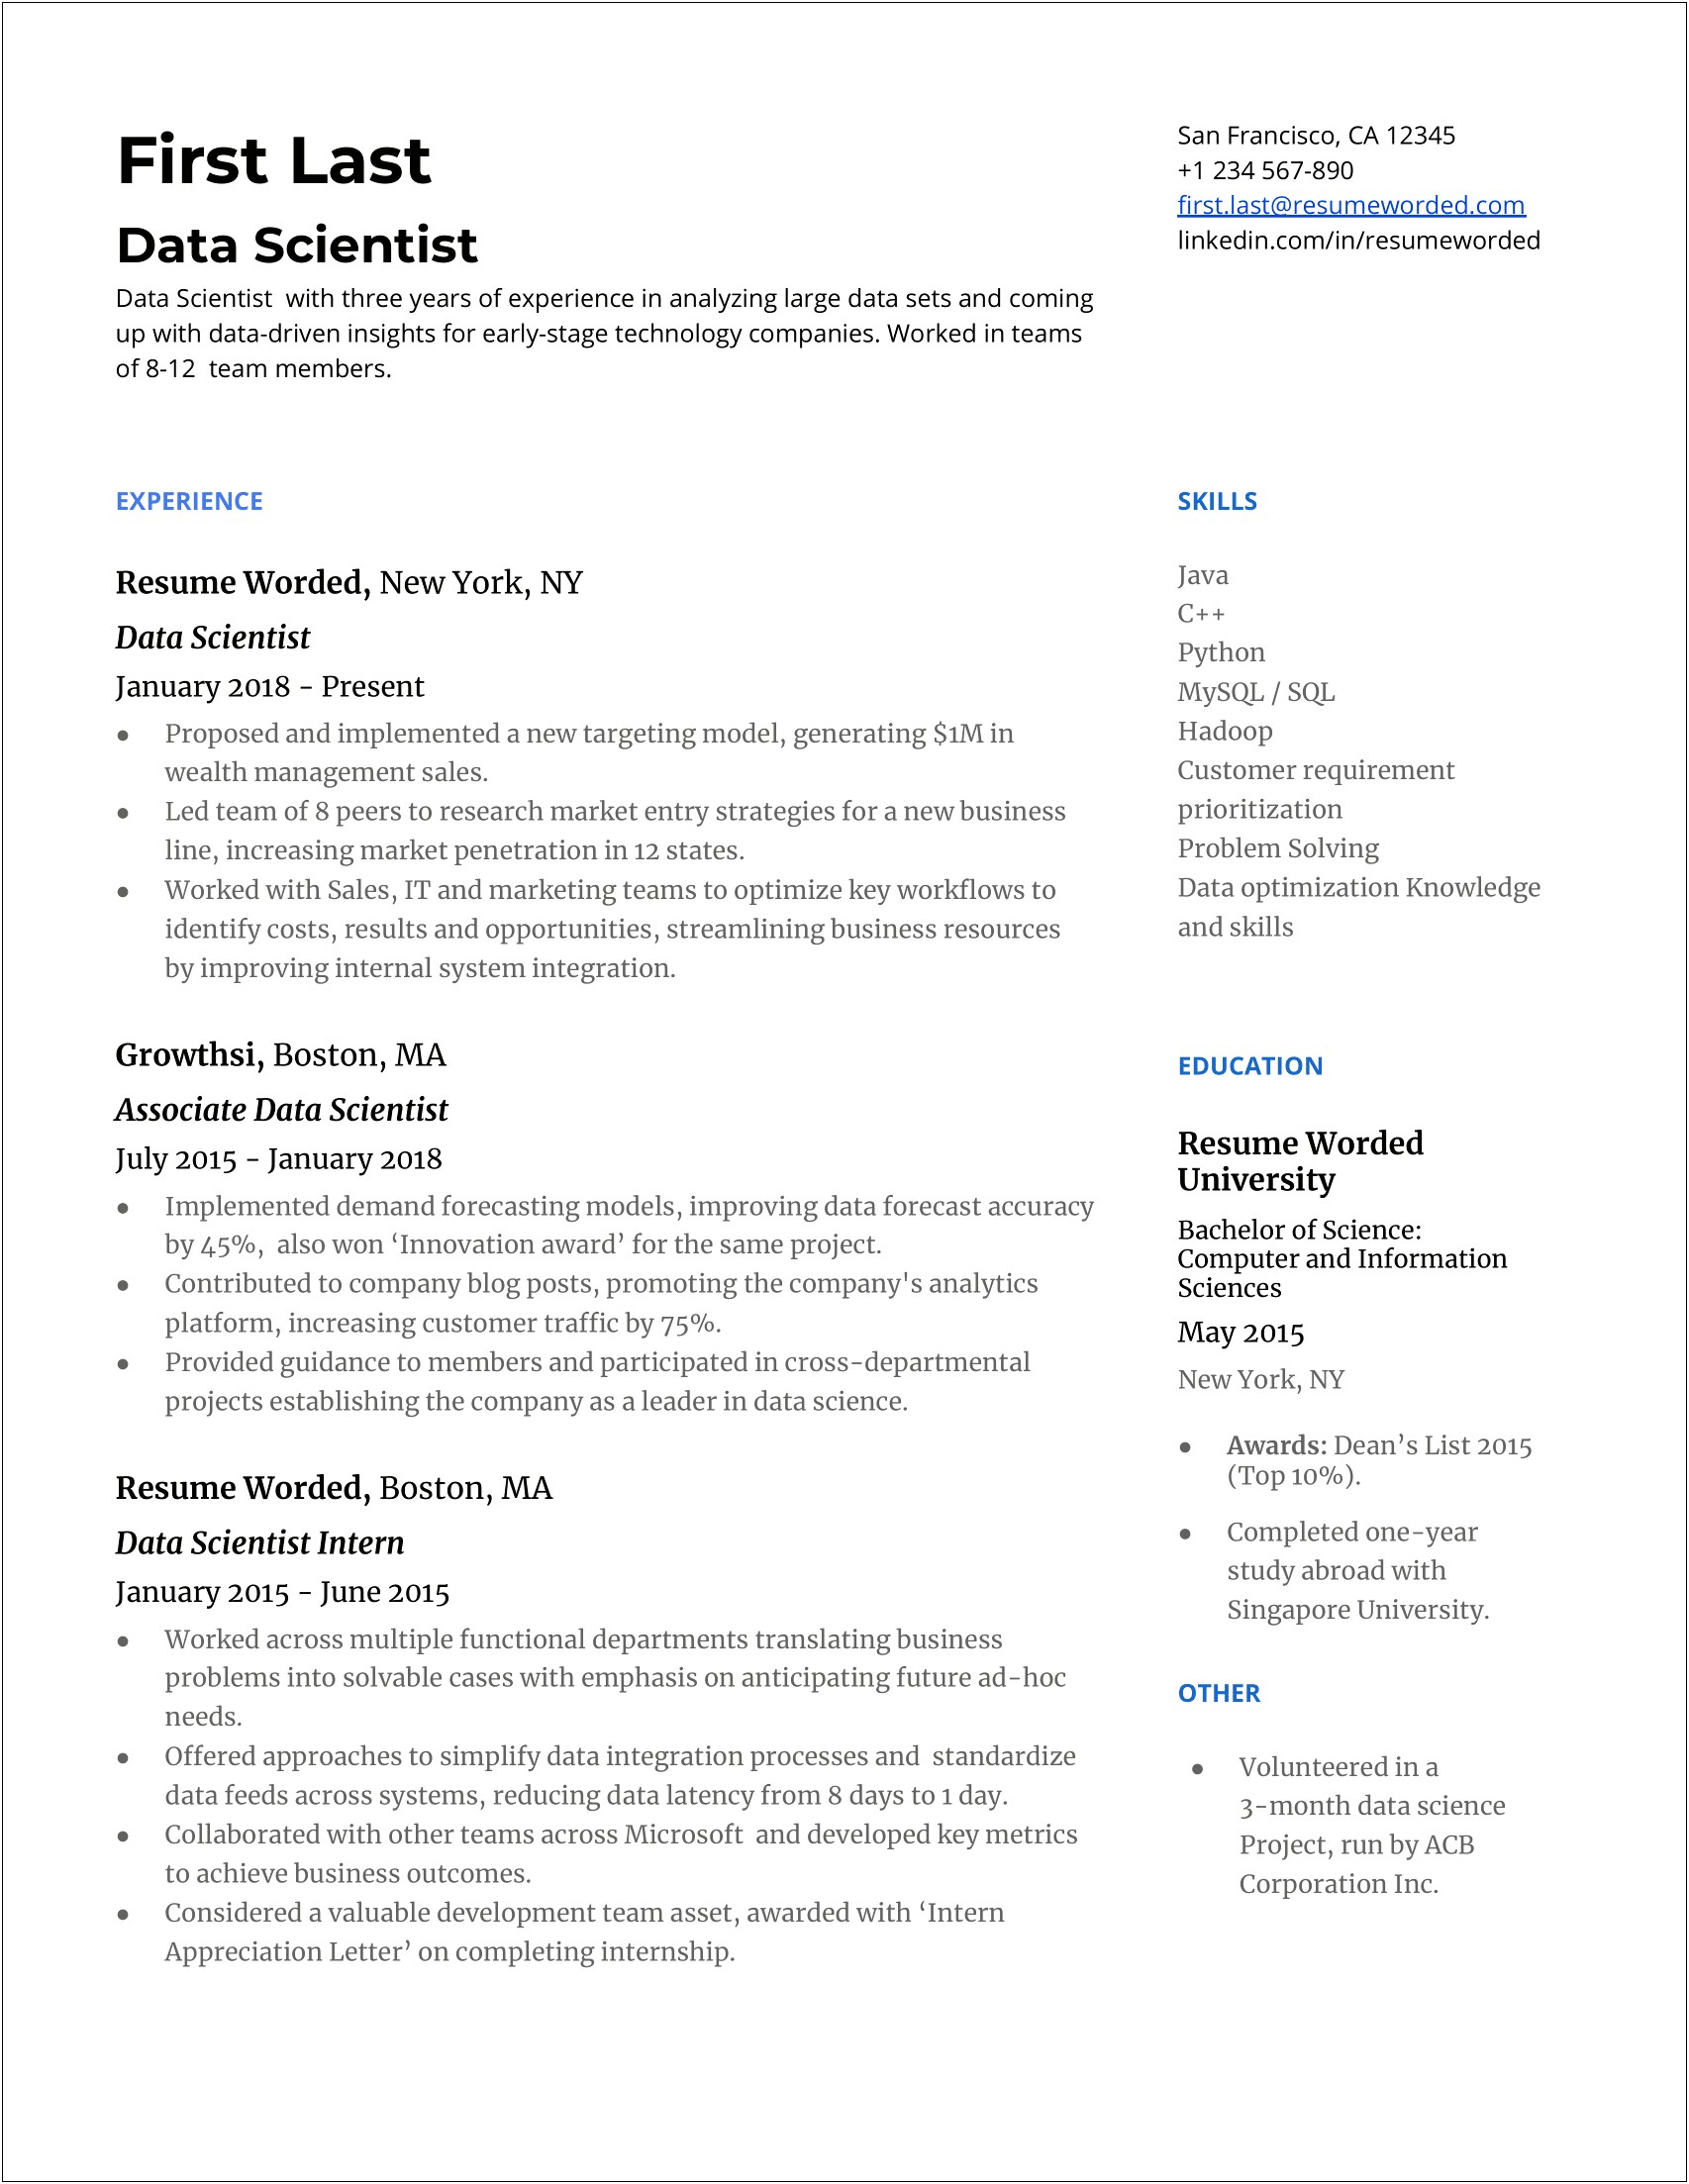 Example Resume If You Have Bachelor Of Science